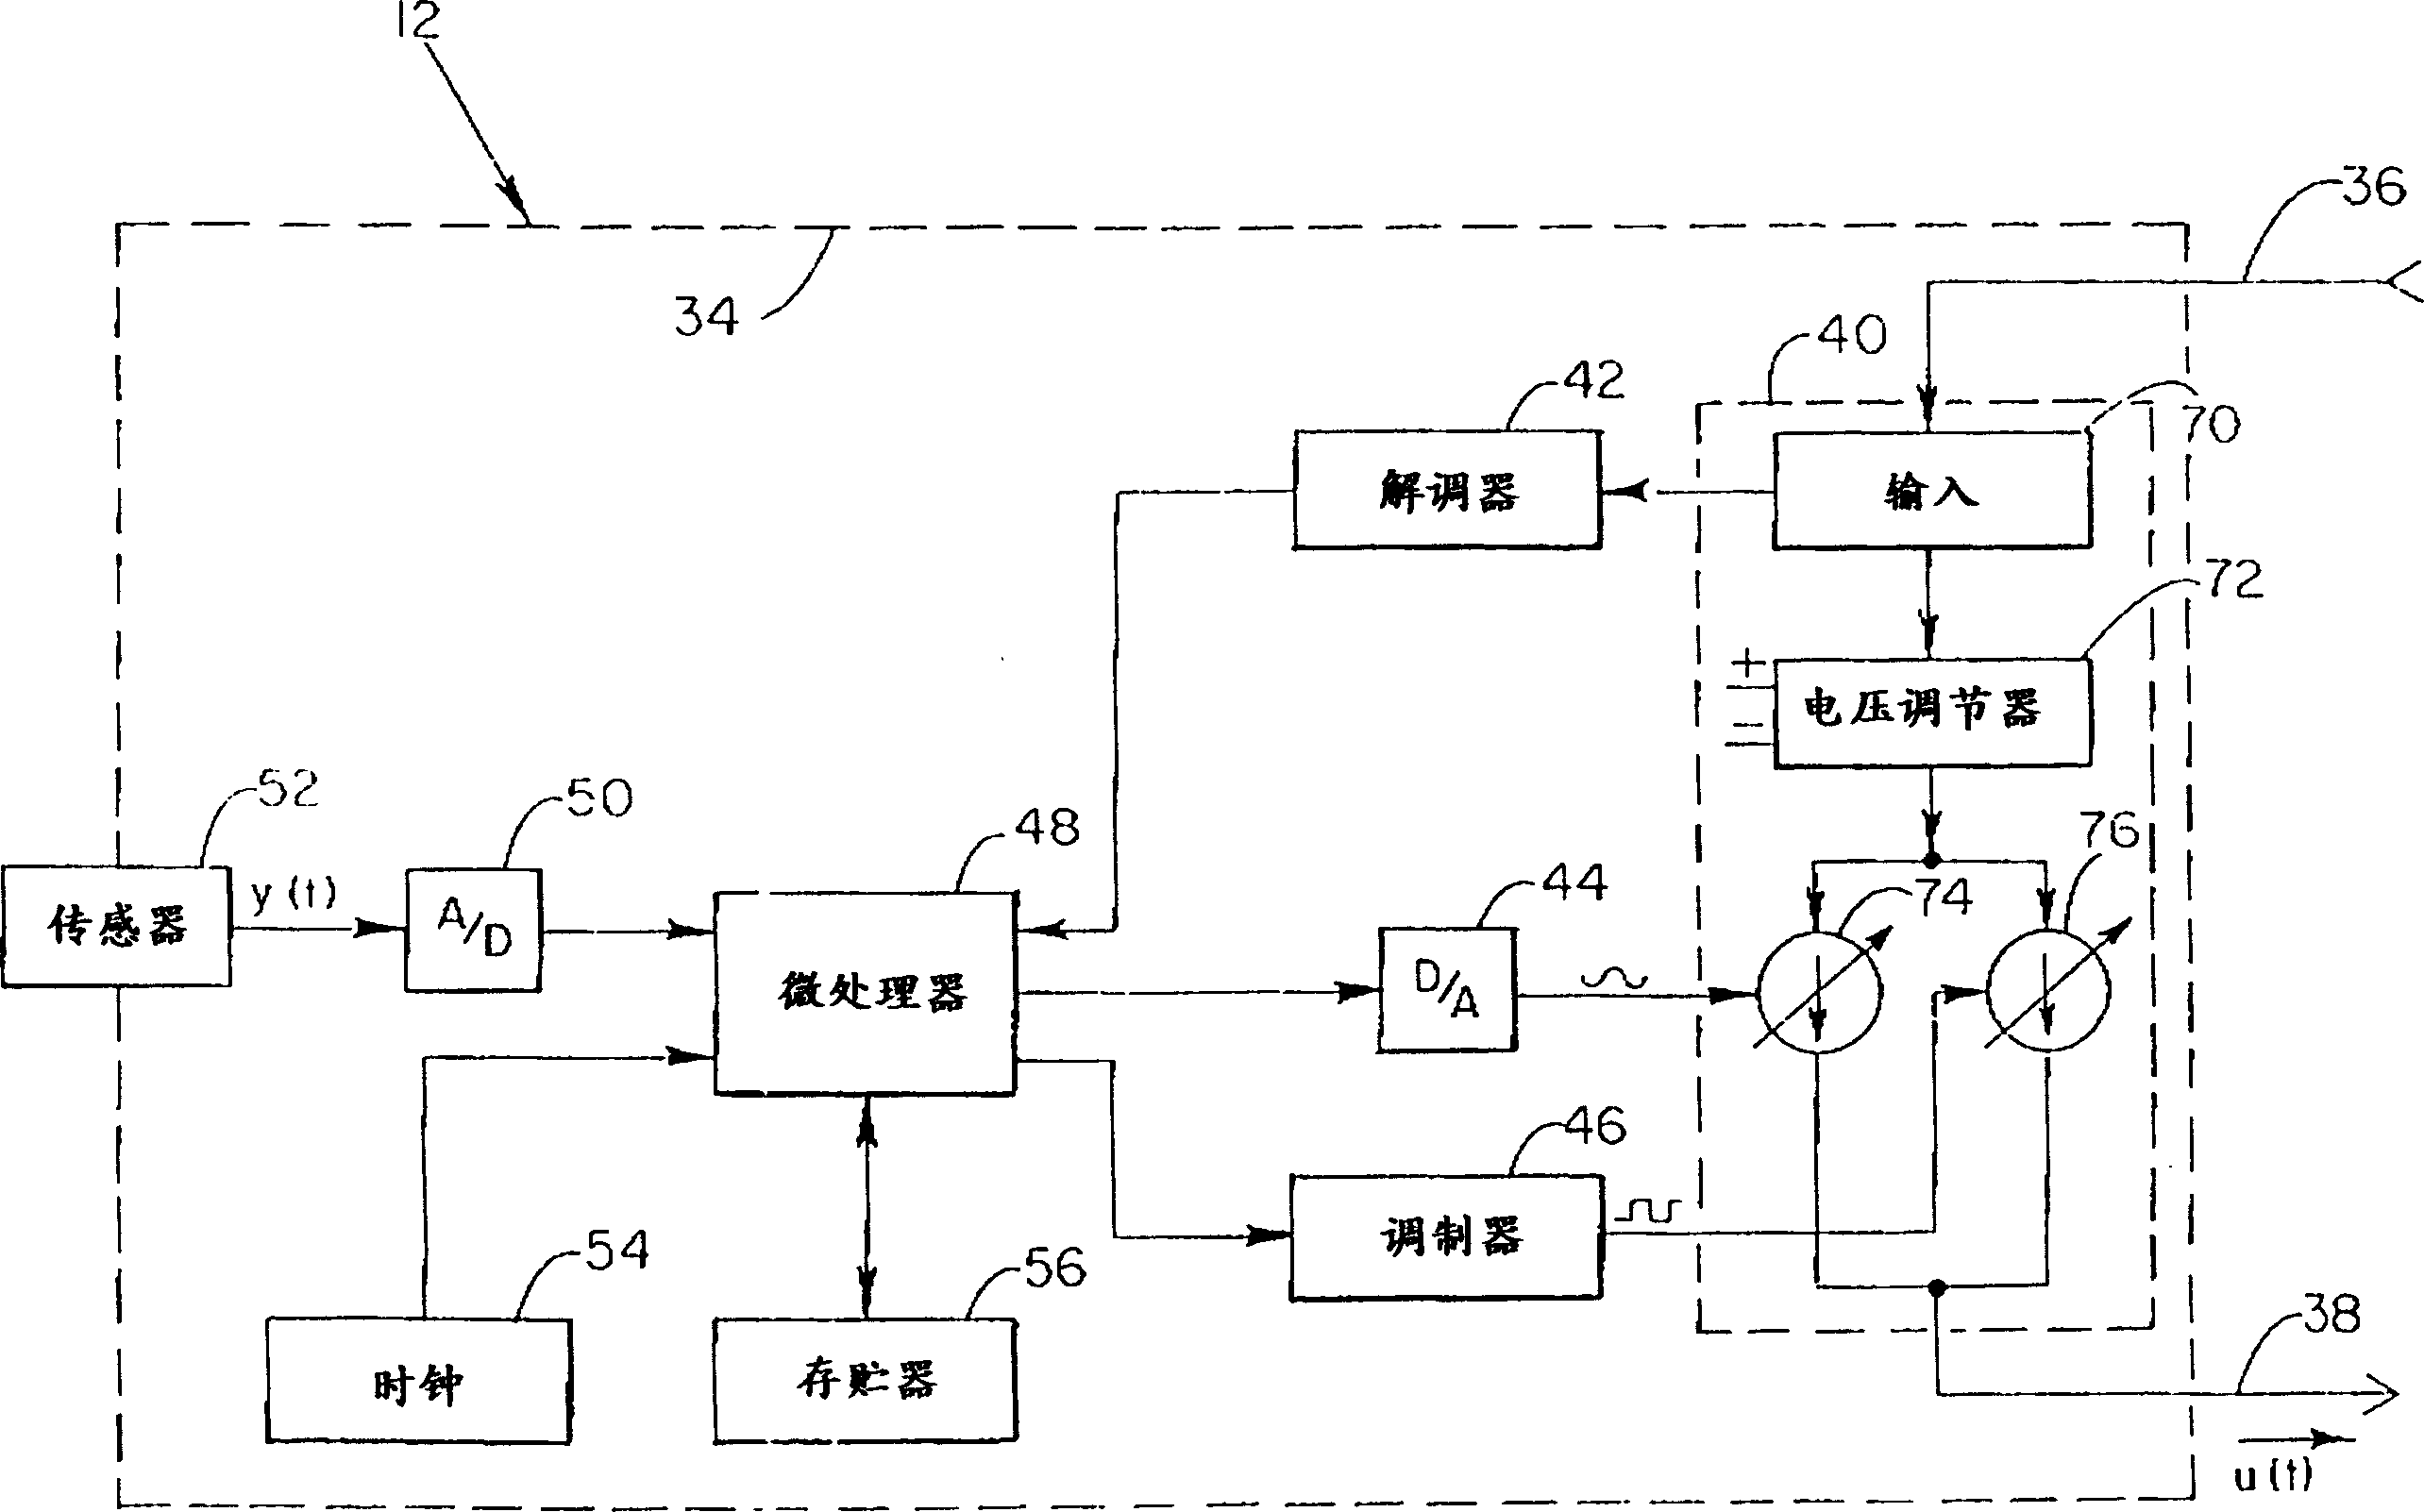 Field based process control system with auto-tuning